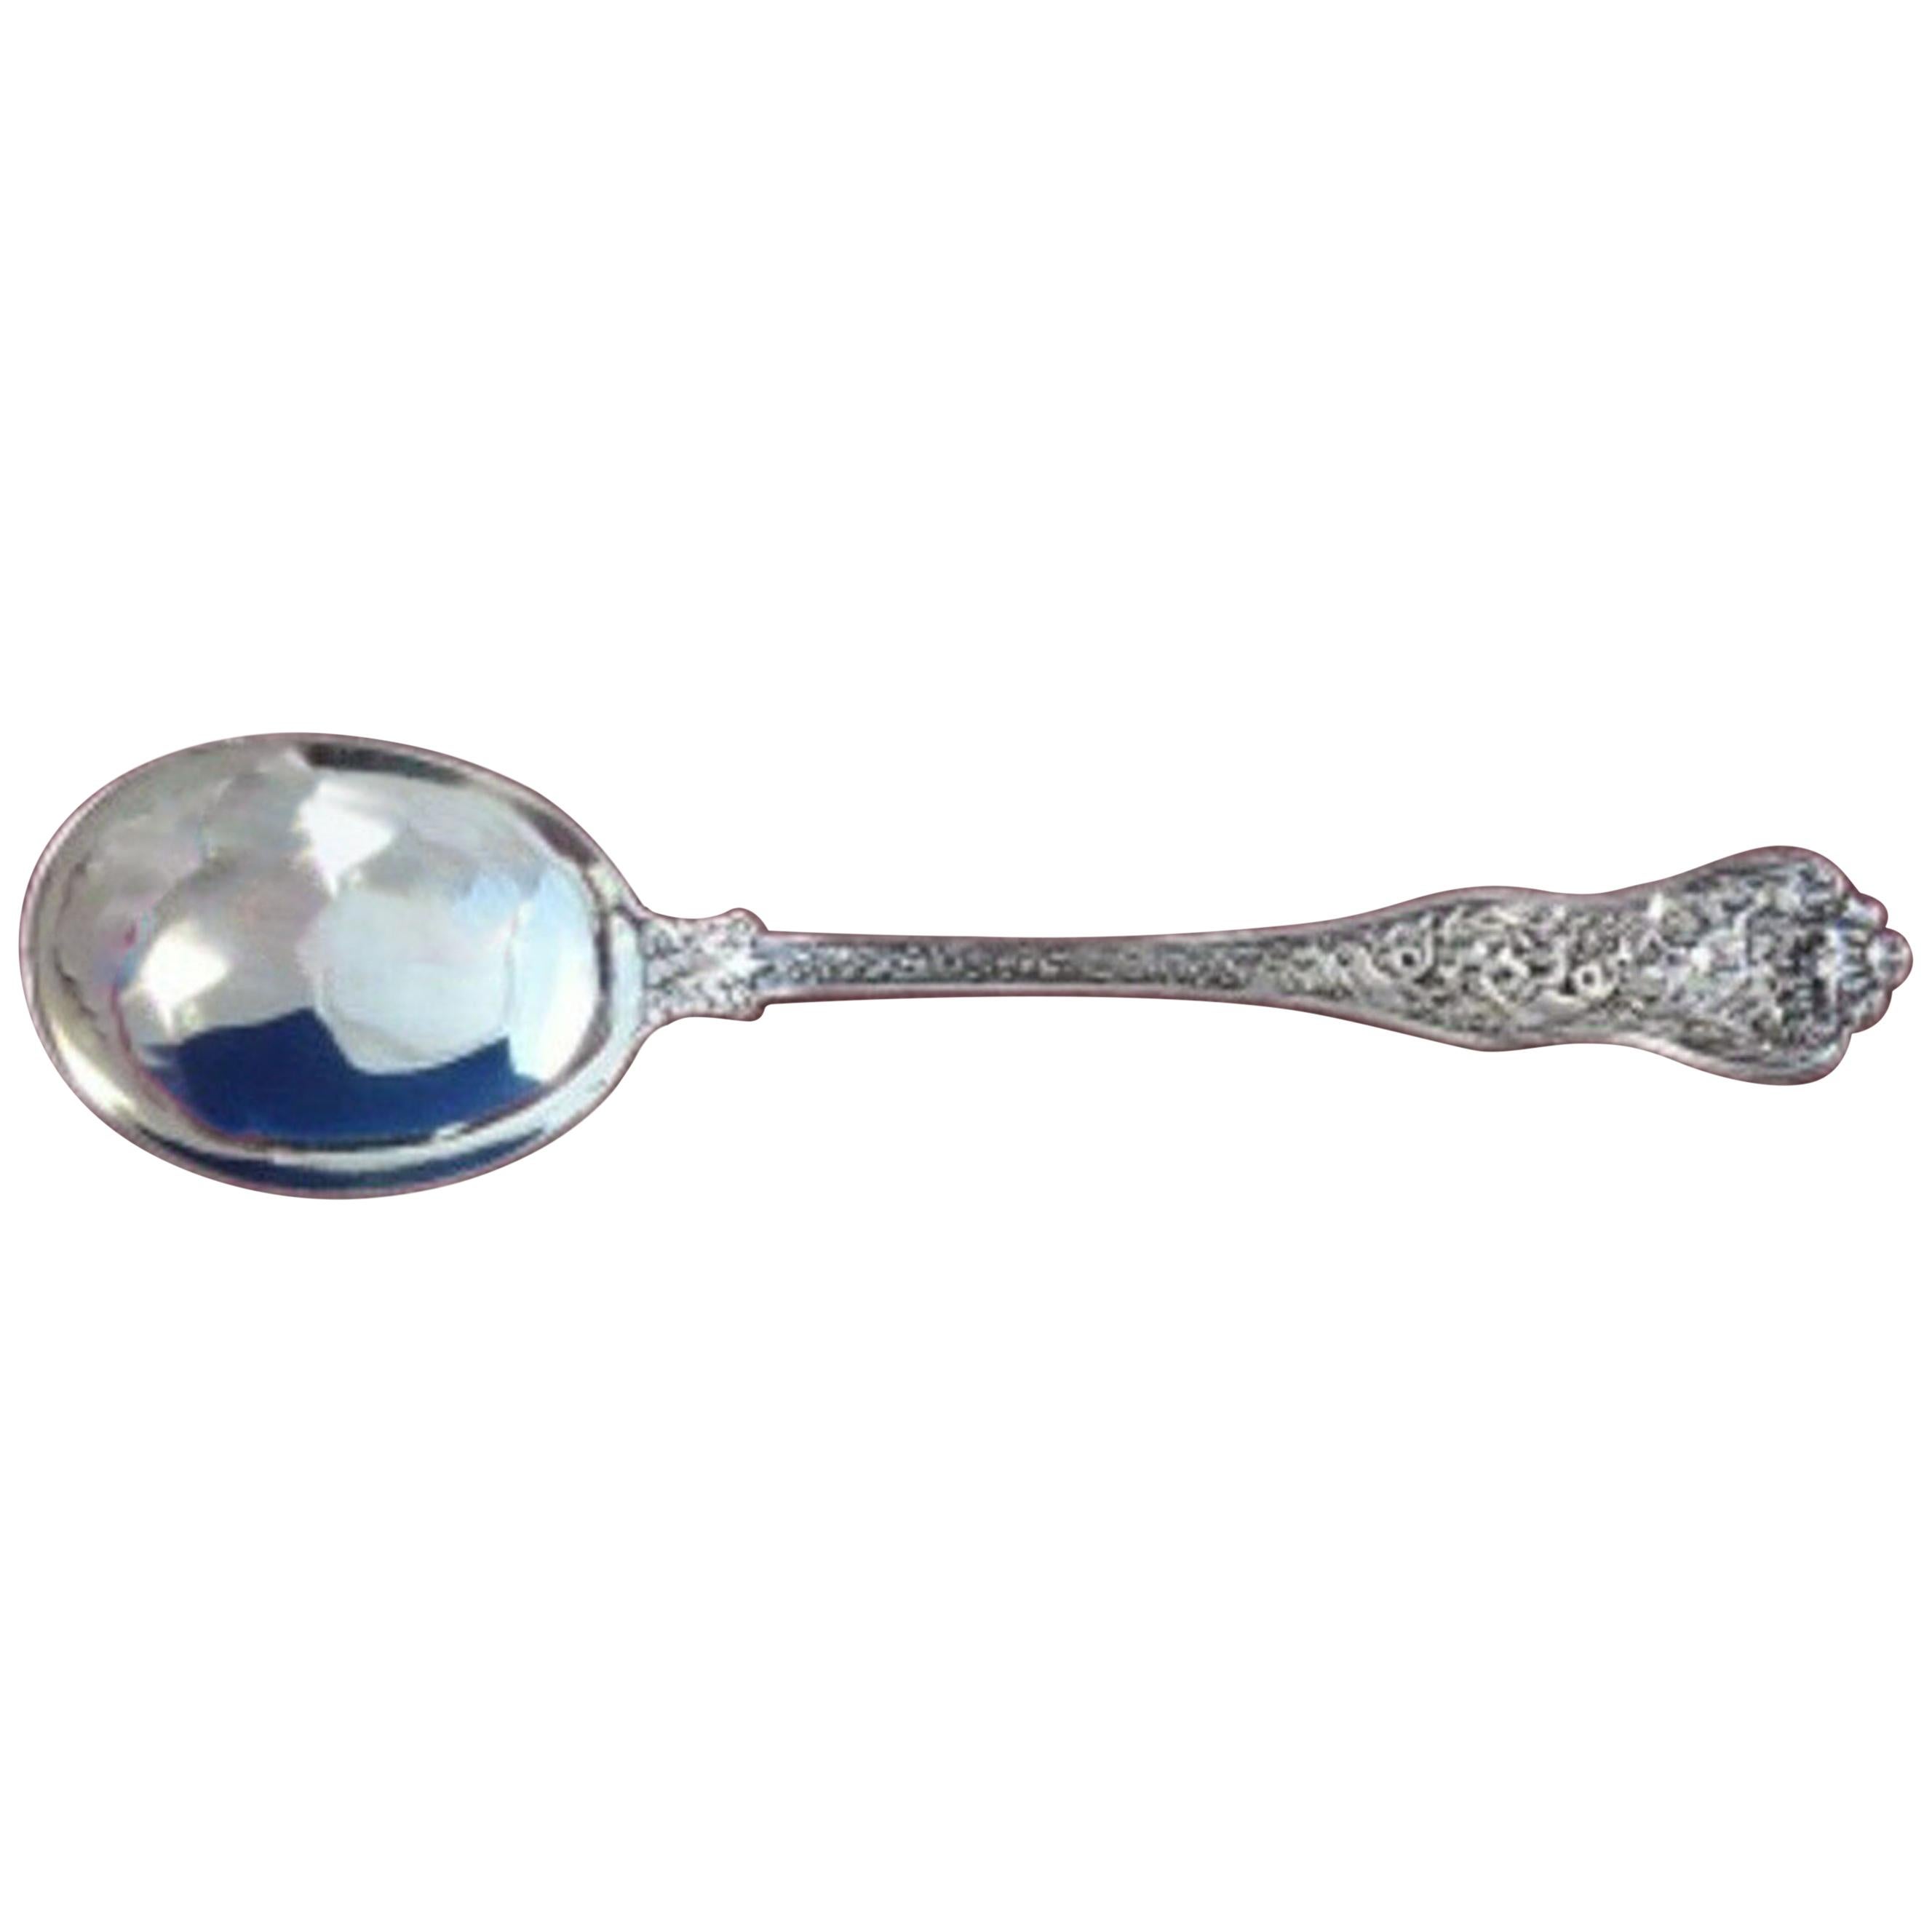 Olympian by Tiffany & Co. Sterling Silver Gumbo Soup Spoon Antique